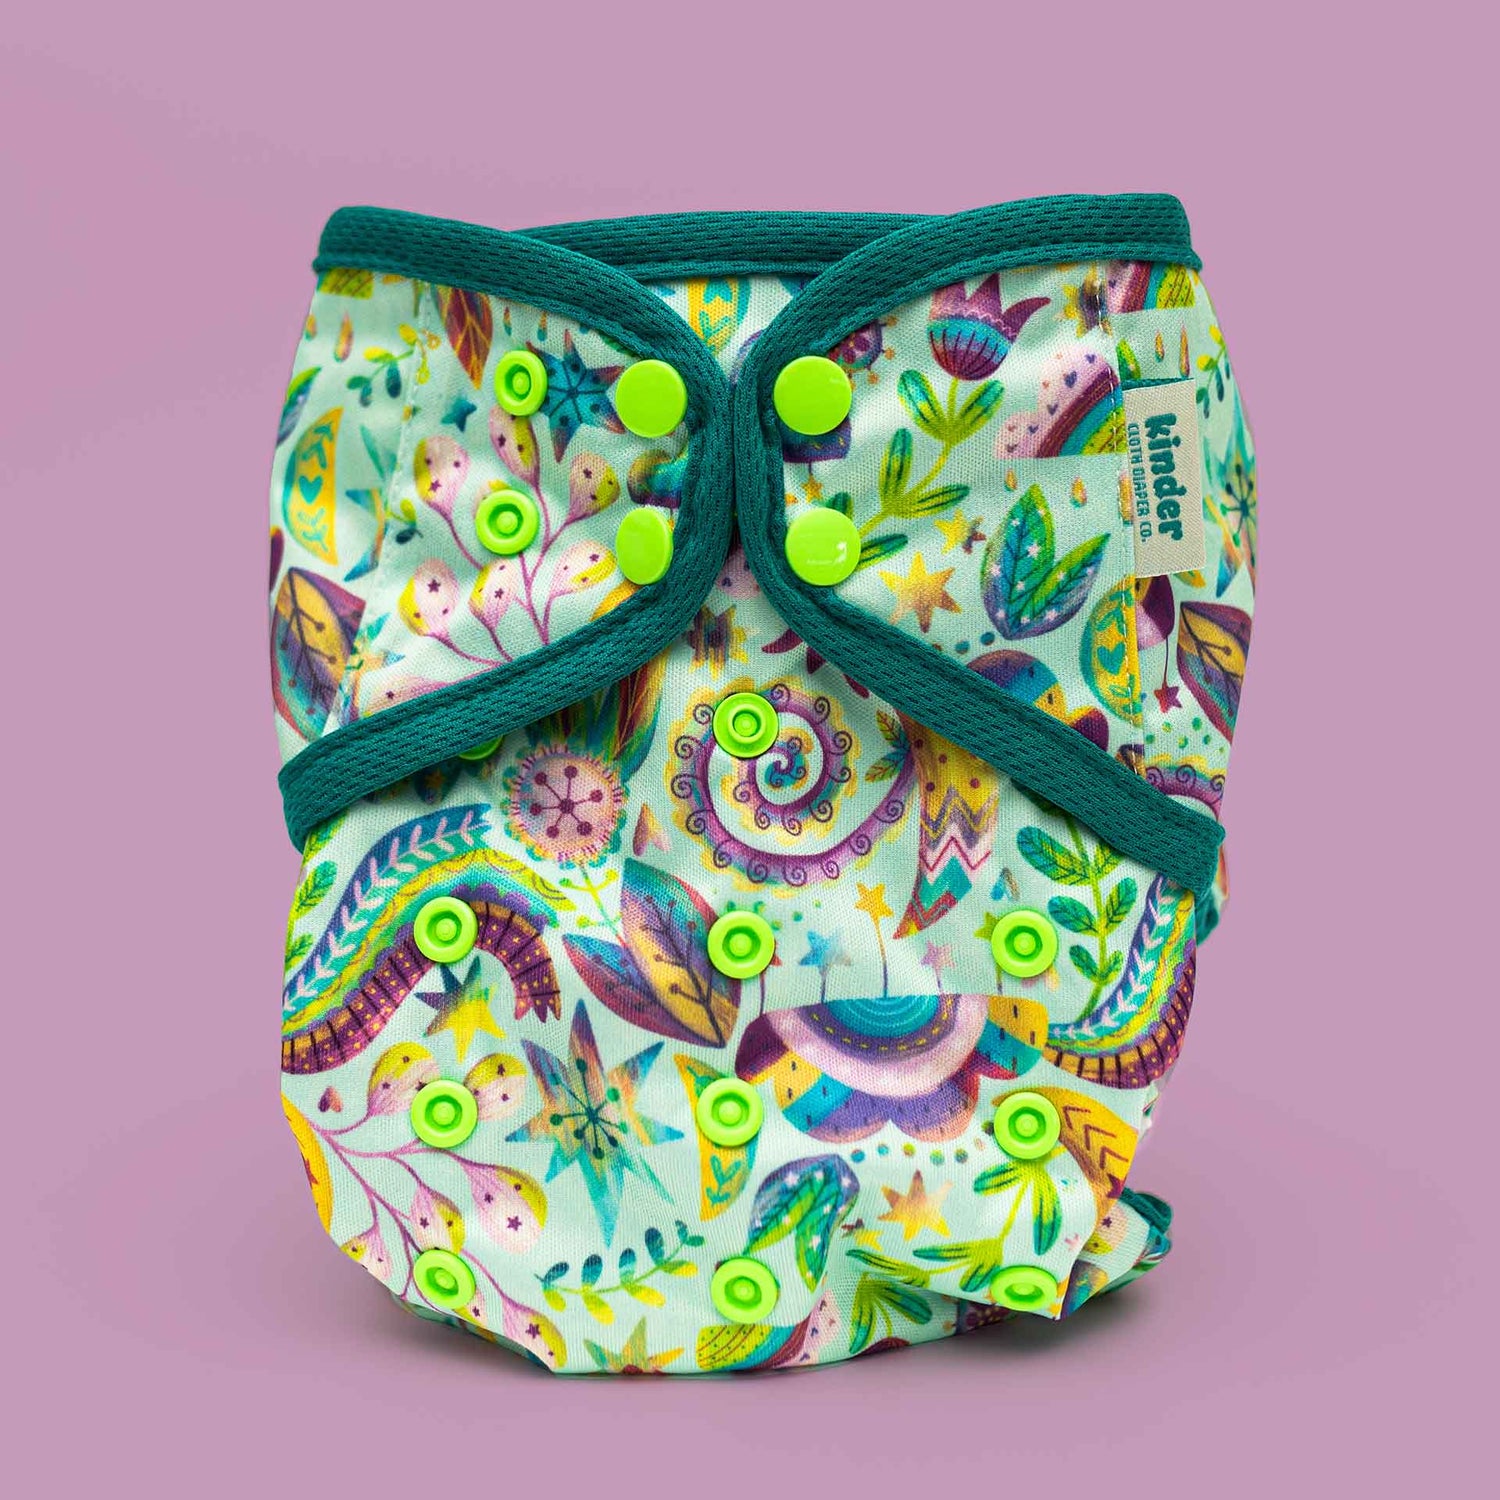 Modern reusable diaper cover sweet dreams Boho whimsical green dreamy best diaper covers pittsburgh